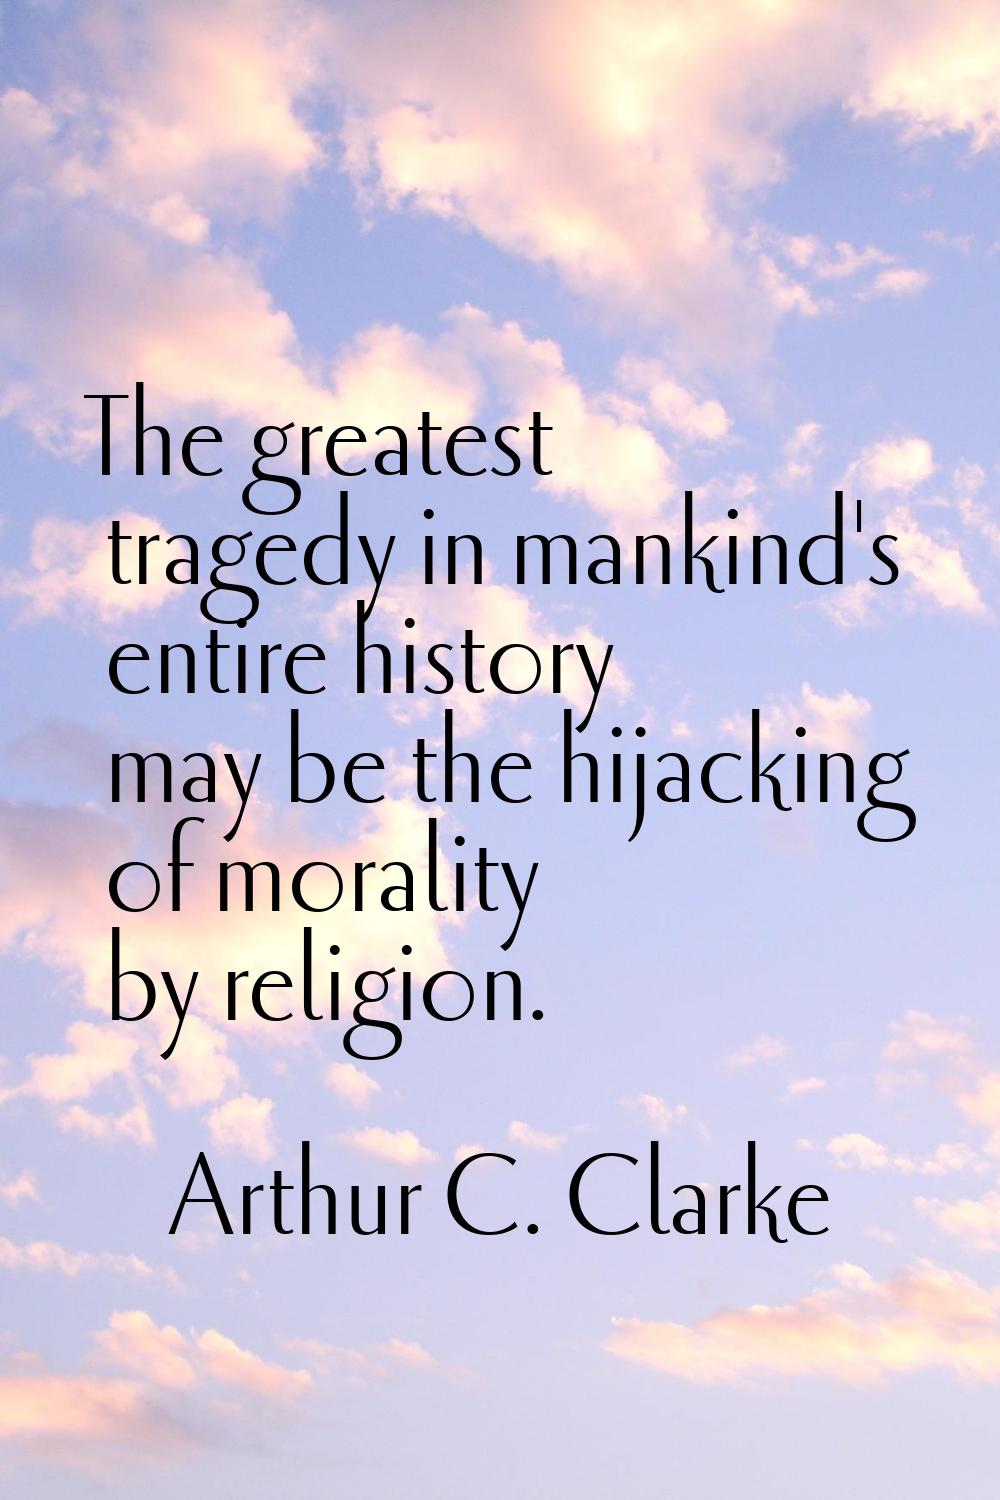 The greatest tragedy in mankind's entire history may be the hijacking of morality by religion.